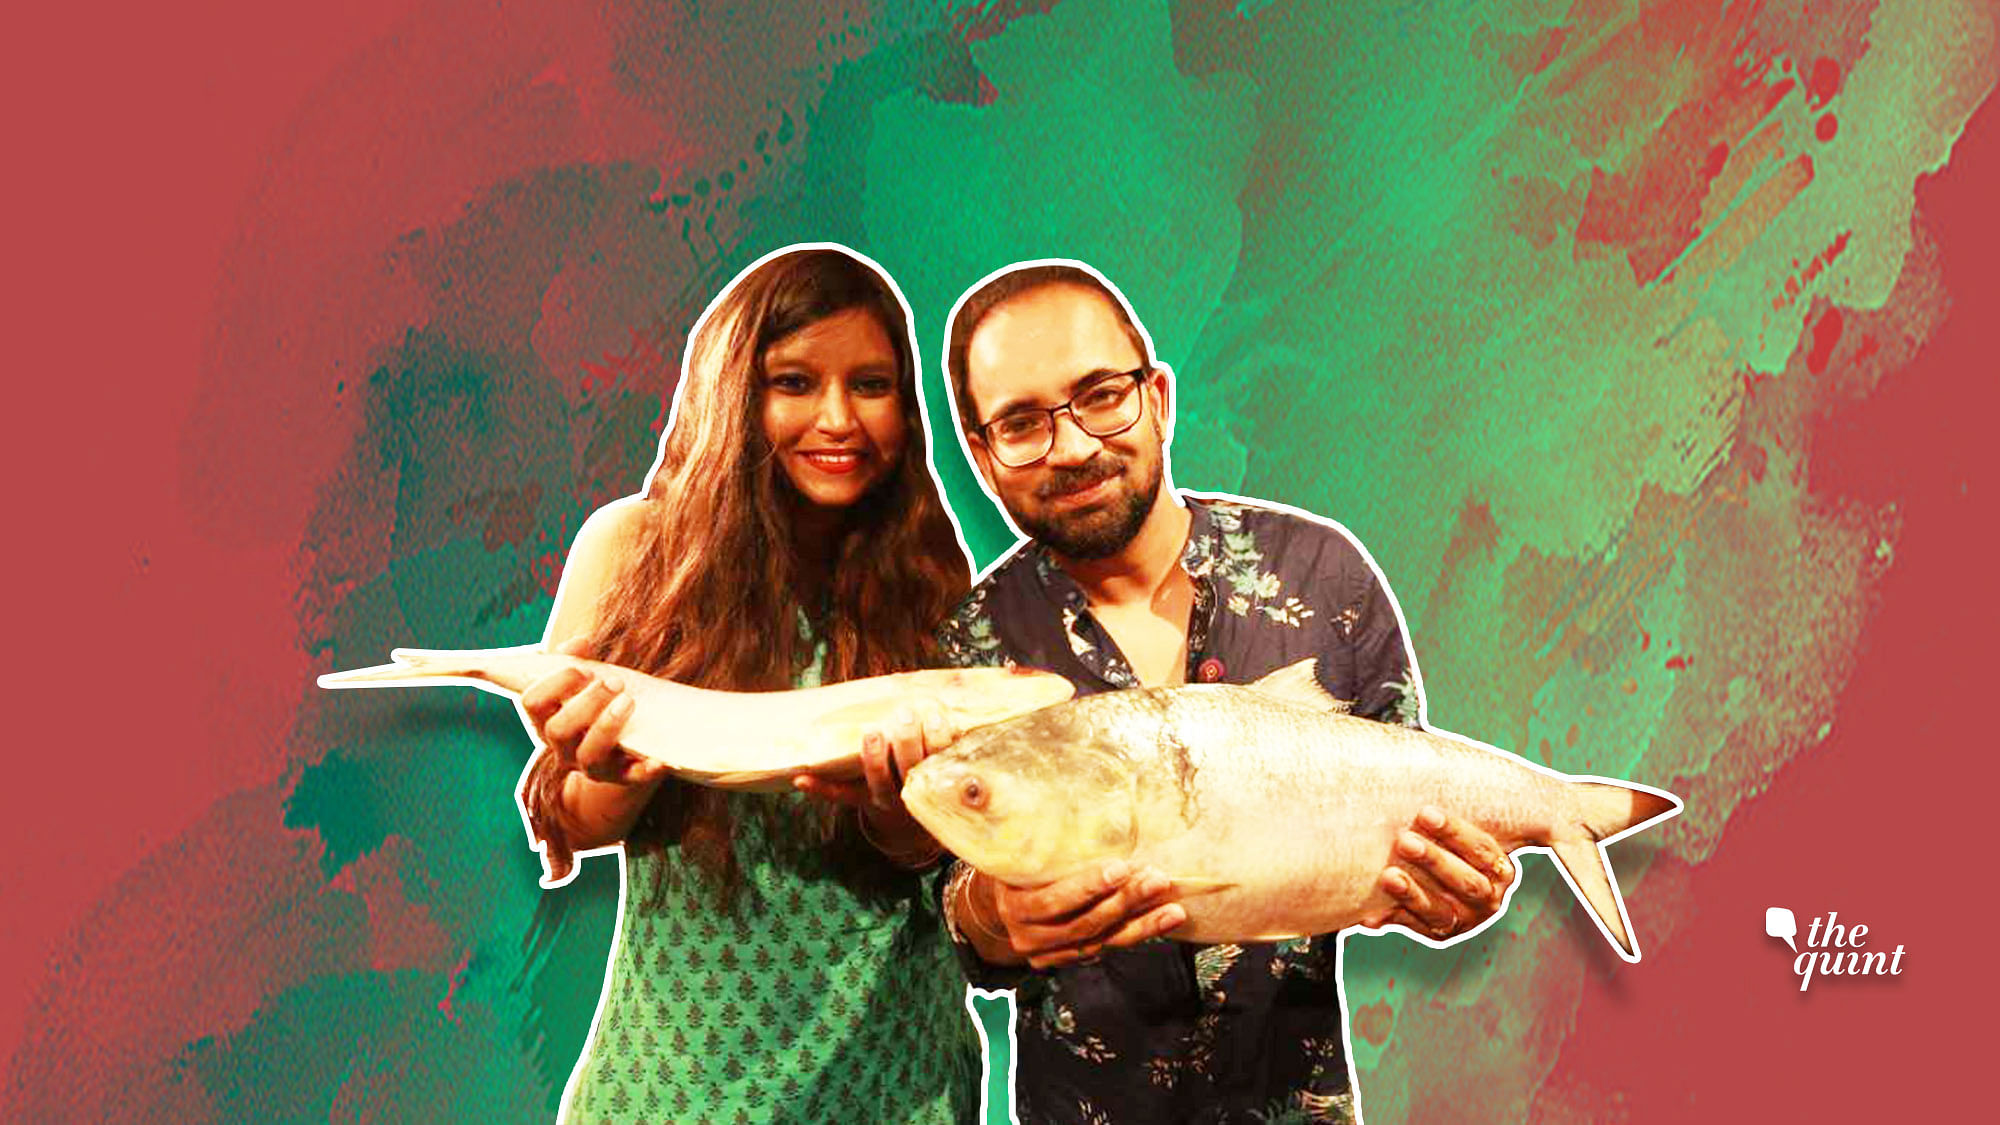 No festival is complete for the Bengalis without the Hilsa.